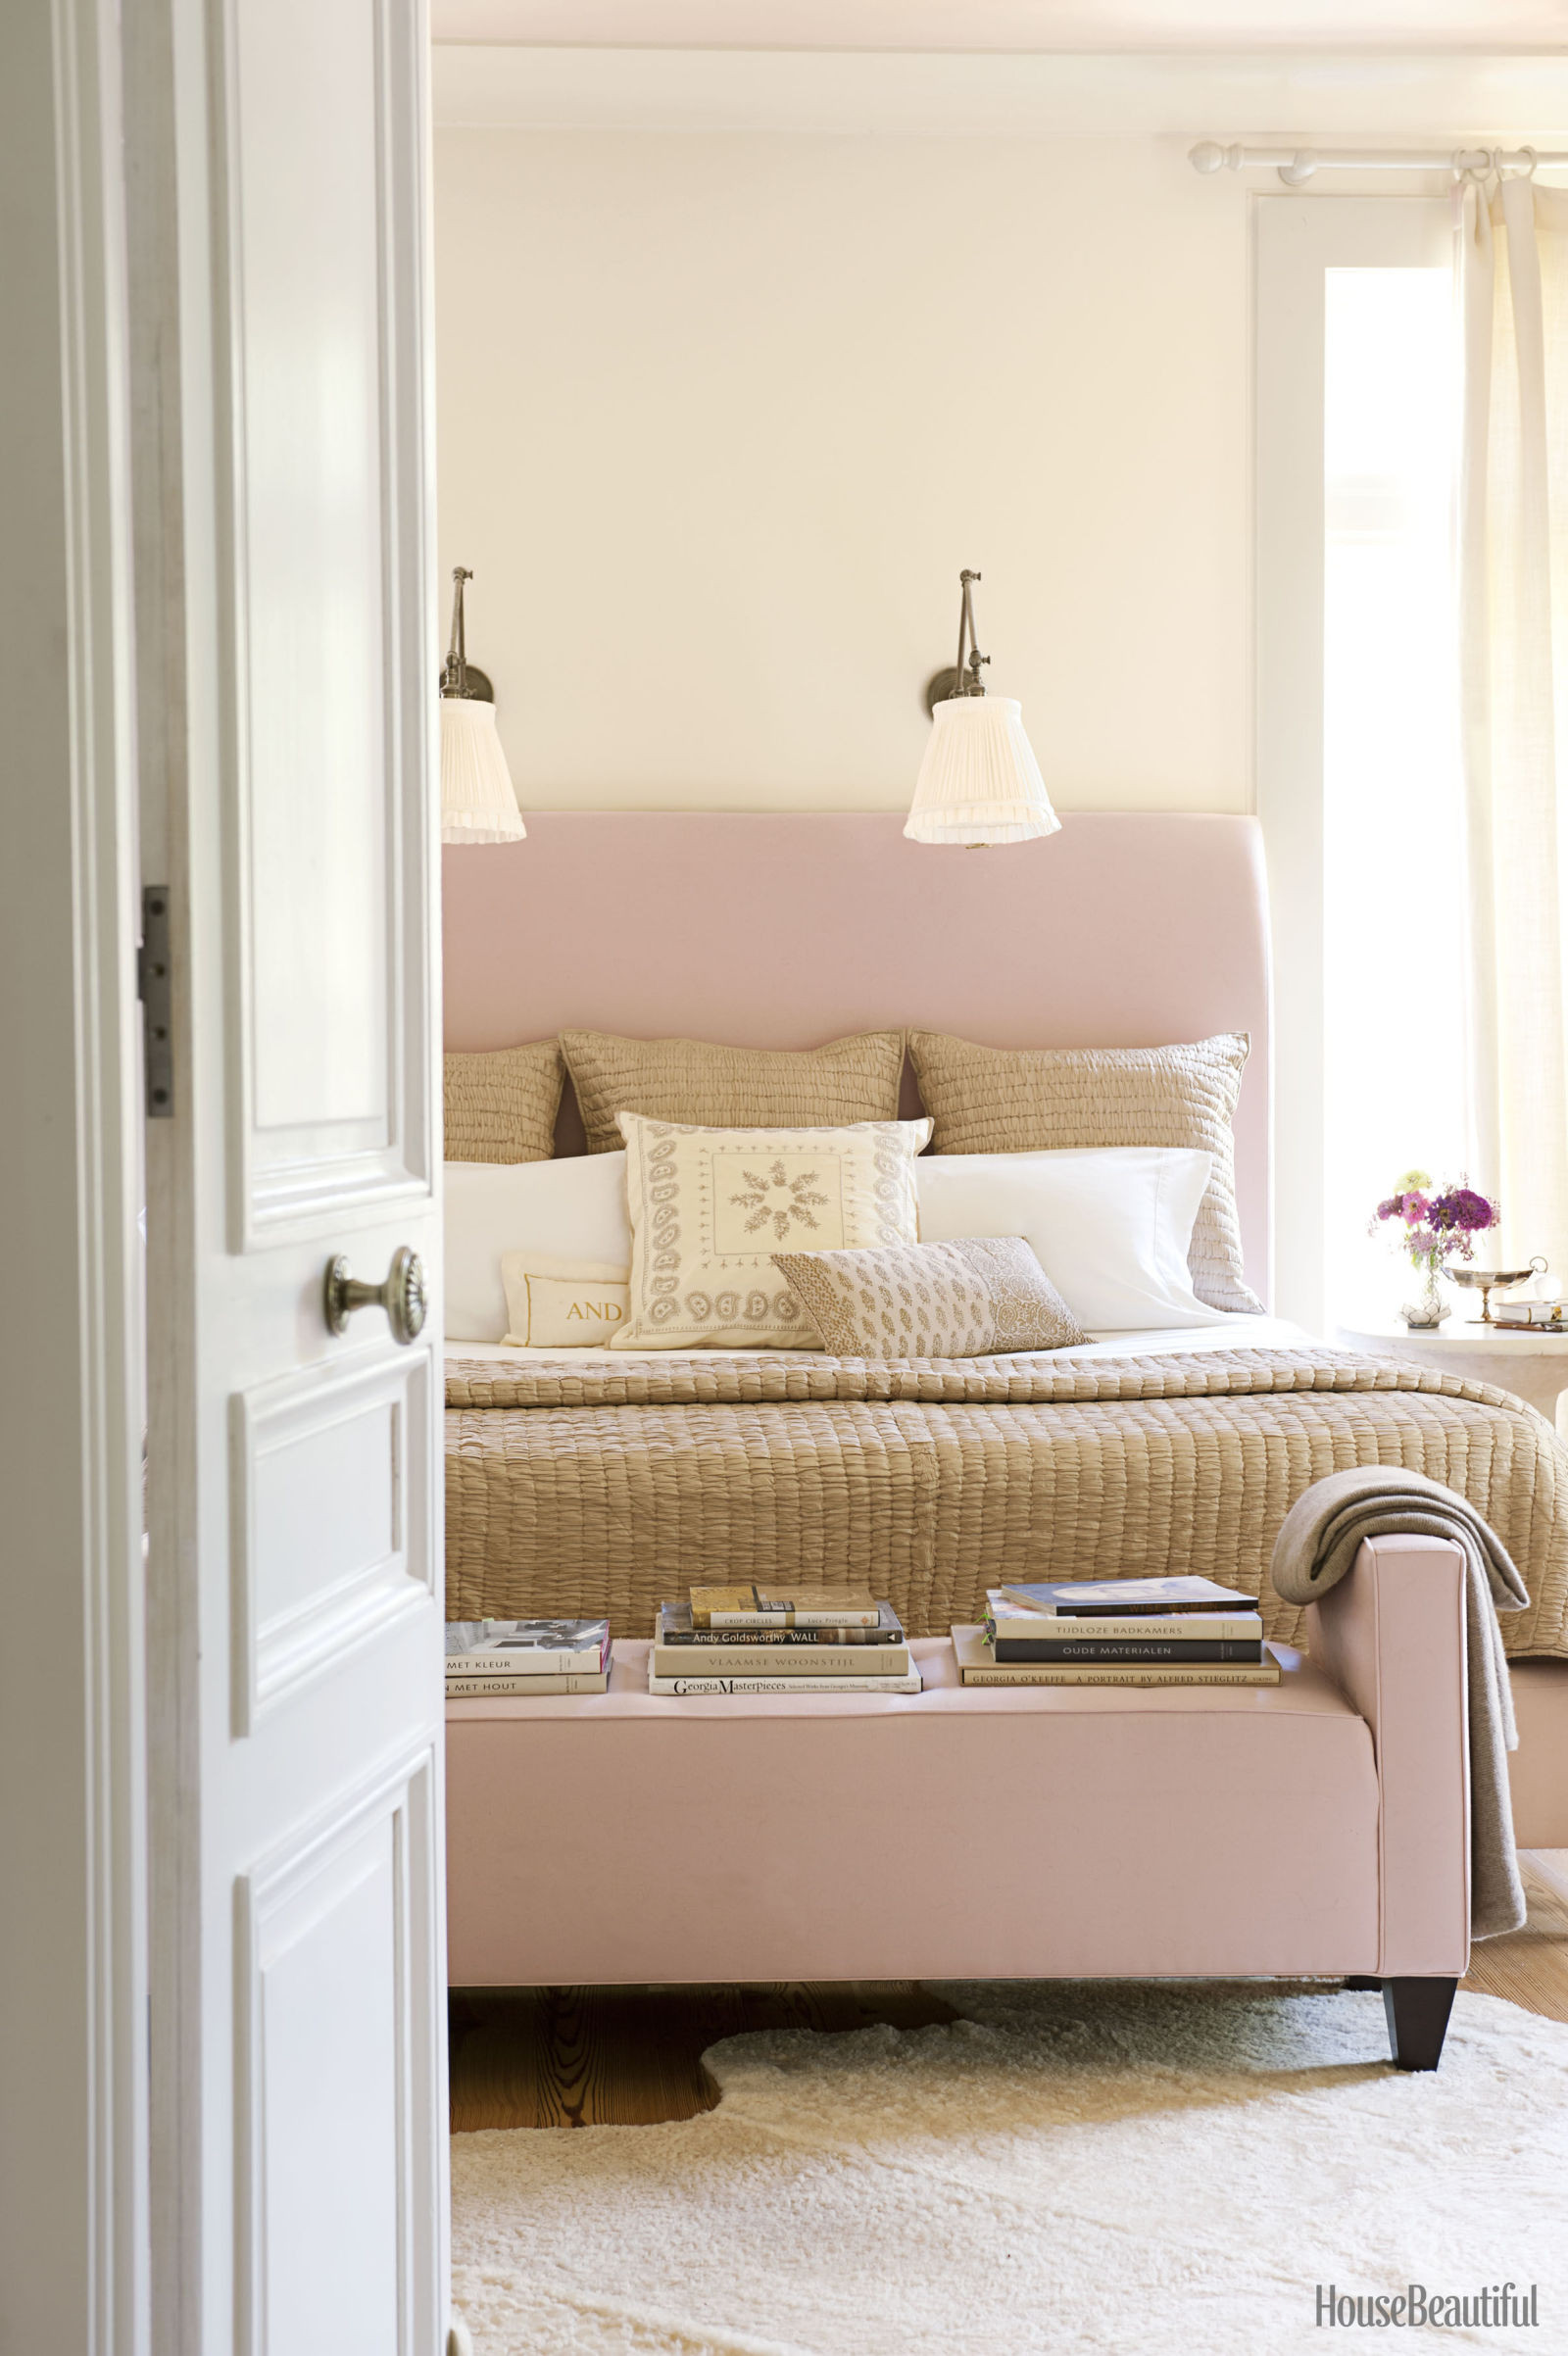 Organizing Your Bedroom
 7 Quick Ways to Organize Your Bedroom This Spring